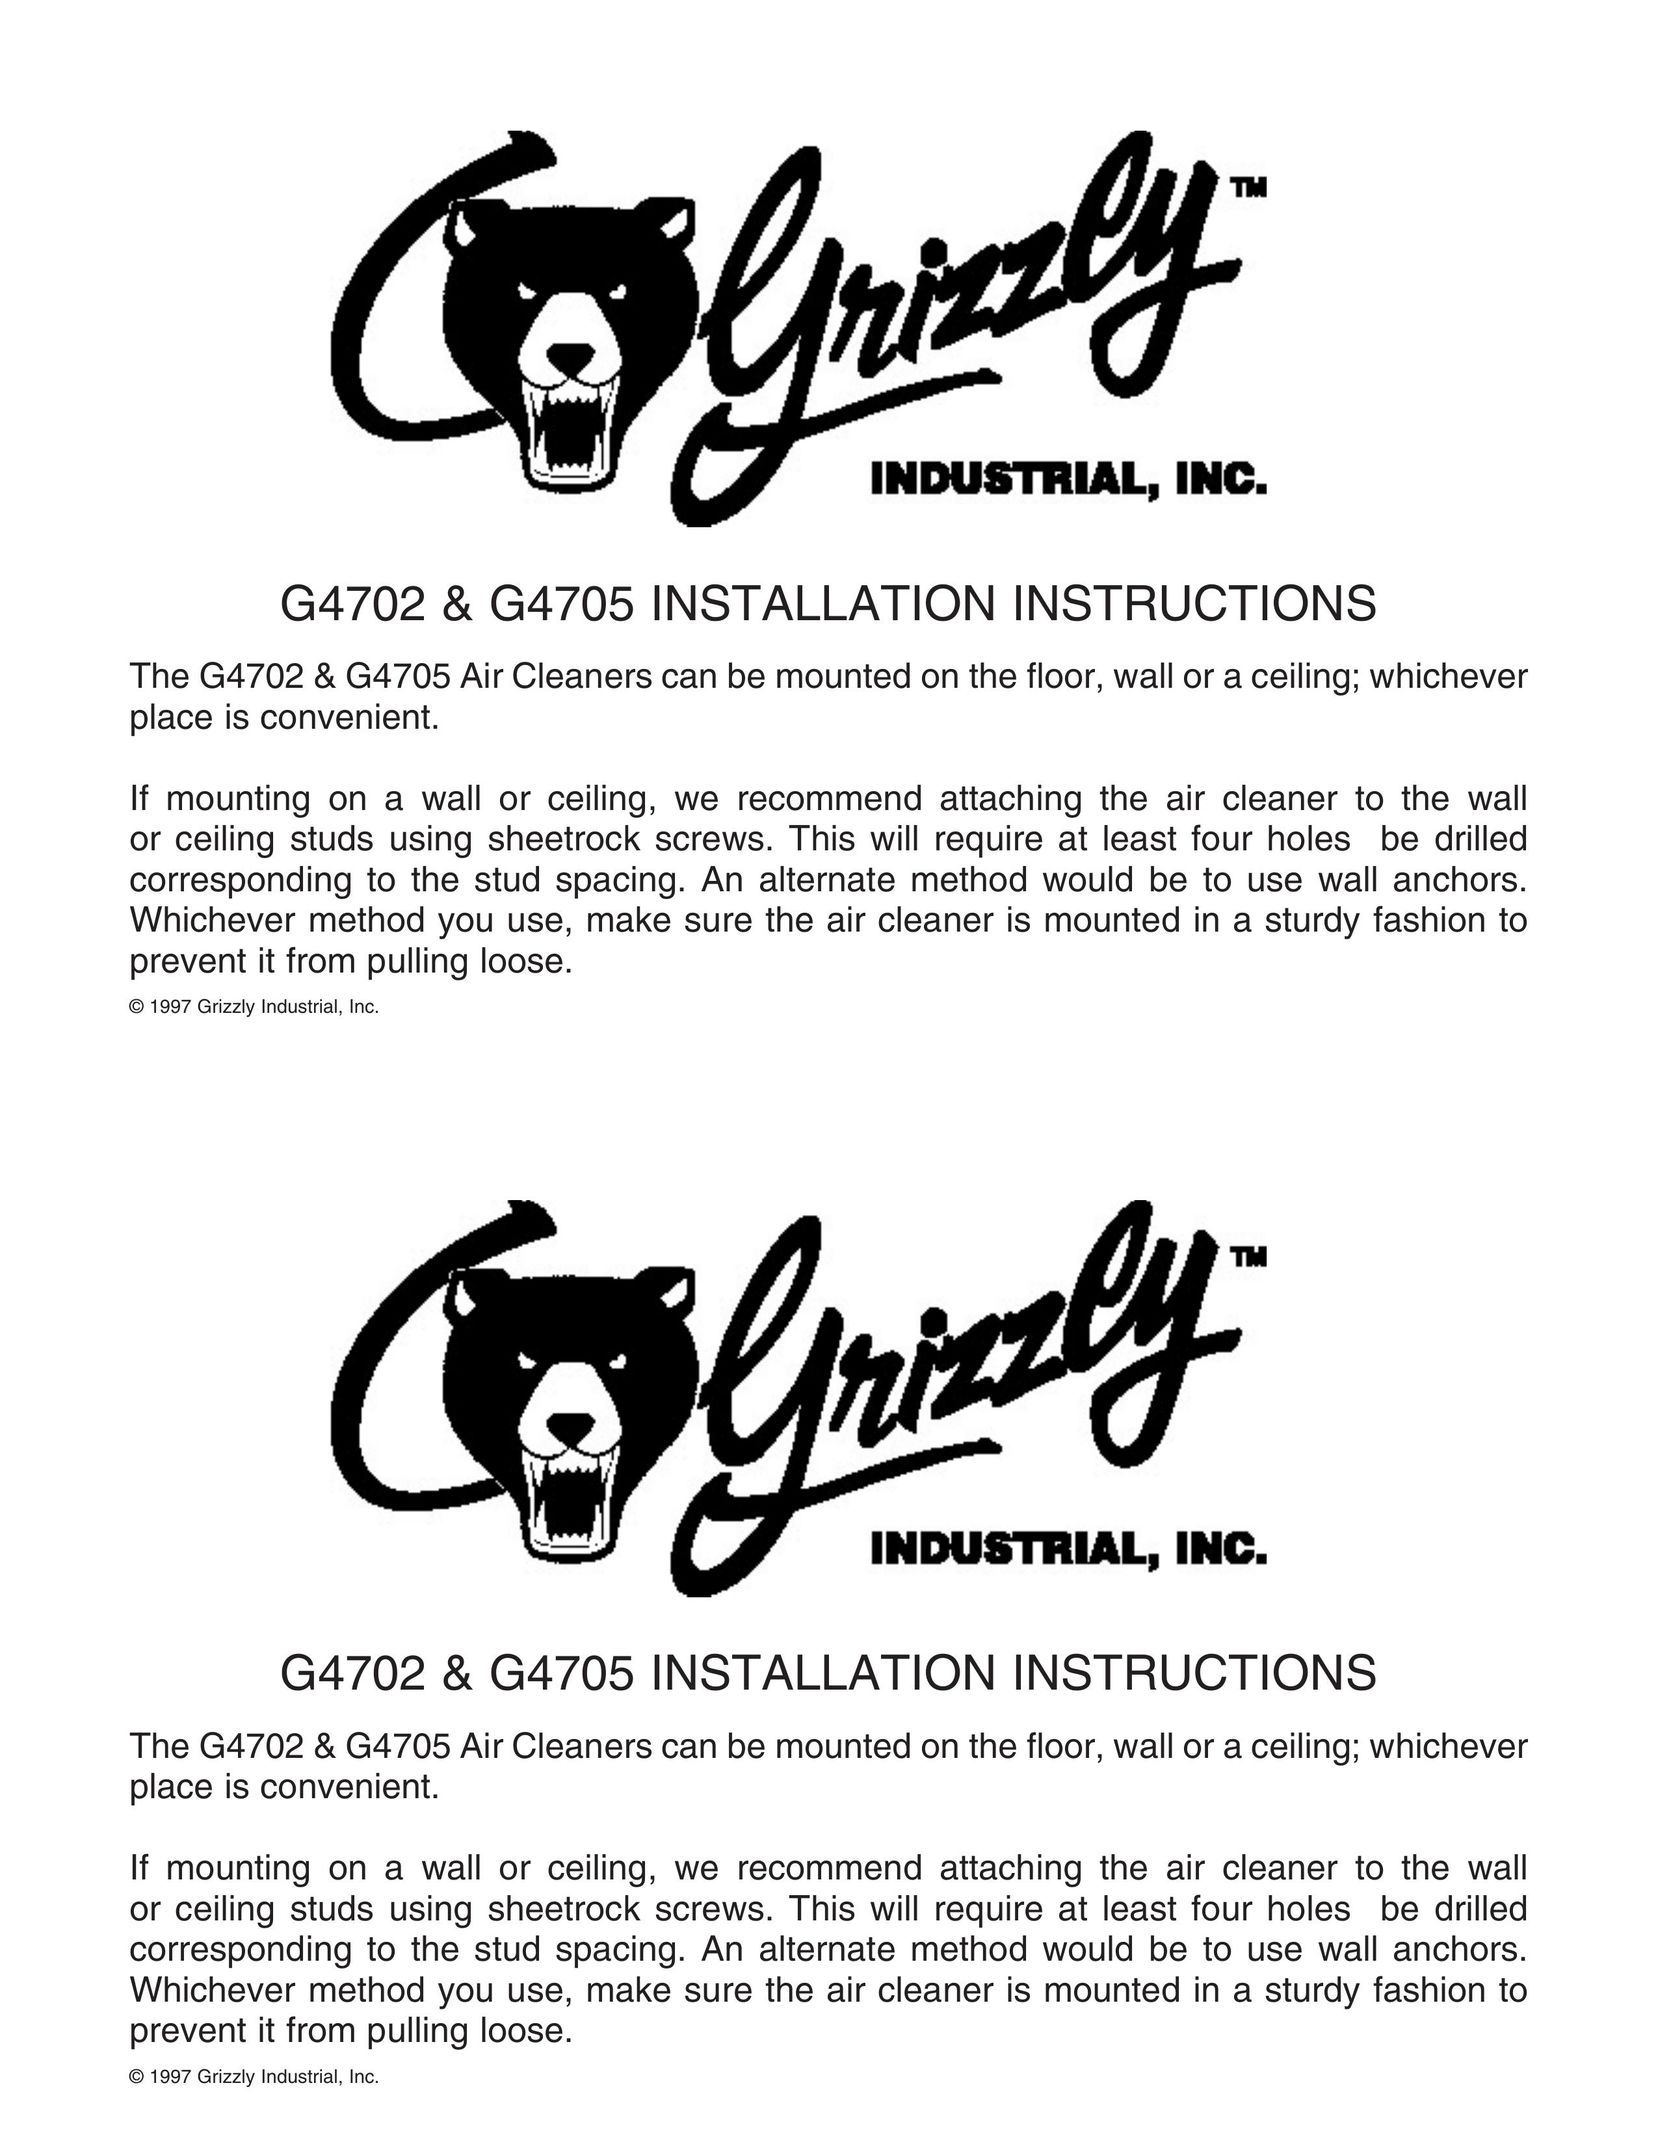 Grizzly G4705 Air Cleaner User Manual